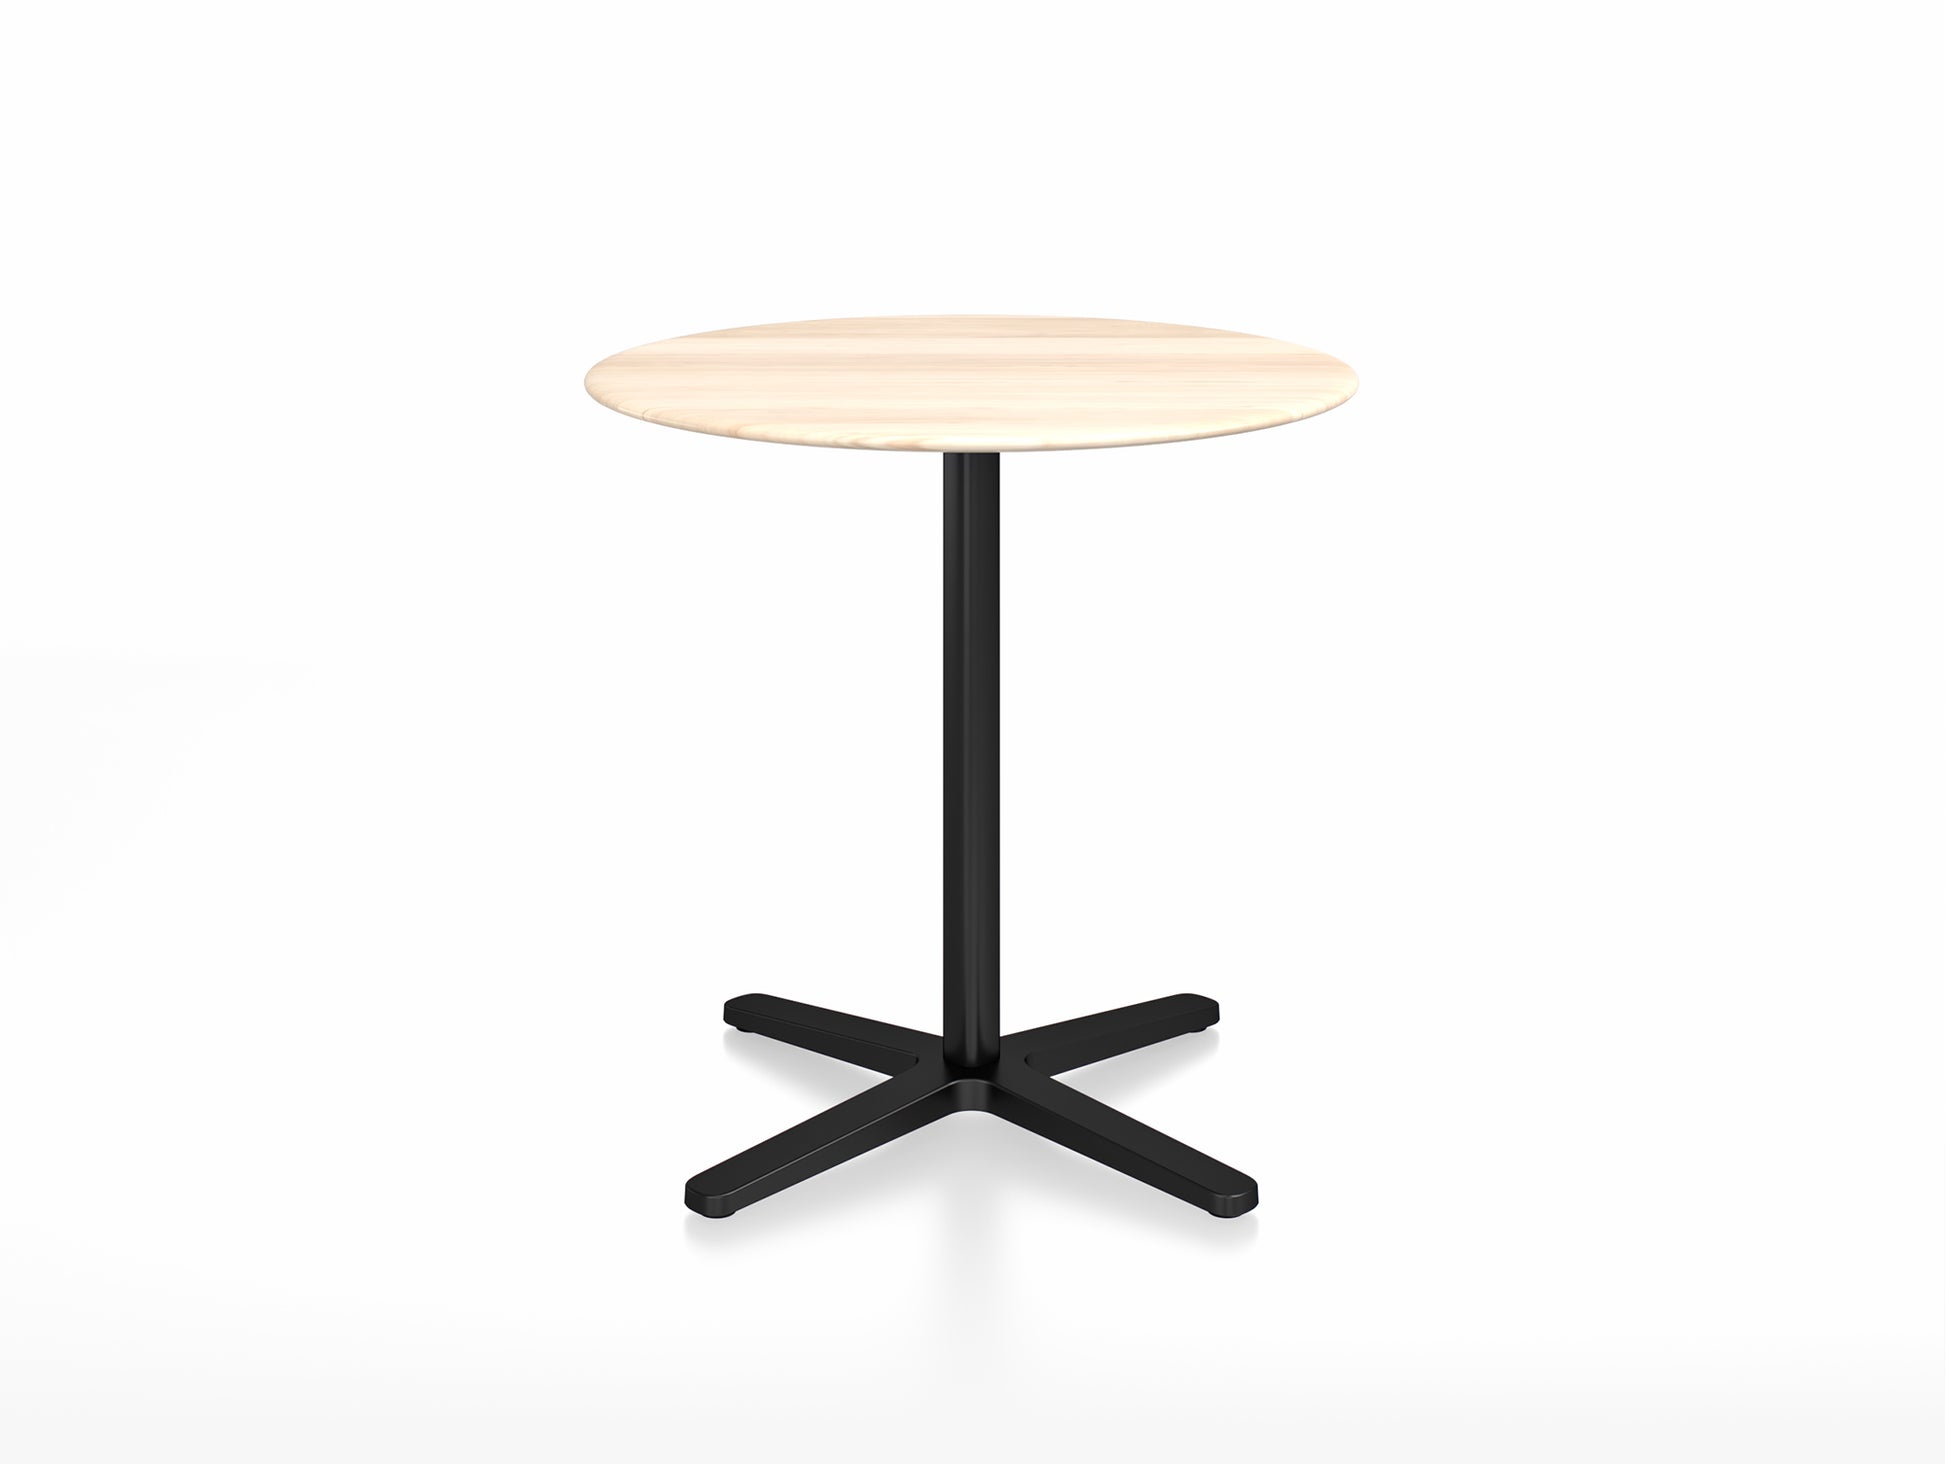 2 Inch Outdoor Cafe Table - X Base by Emeco - Accoya Wood Top / Black Aluminium Base / Diameter 76